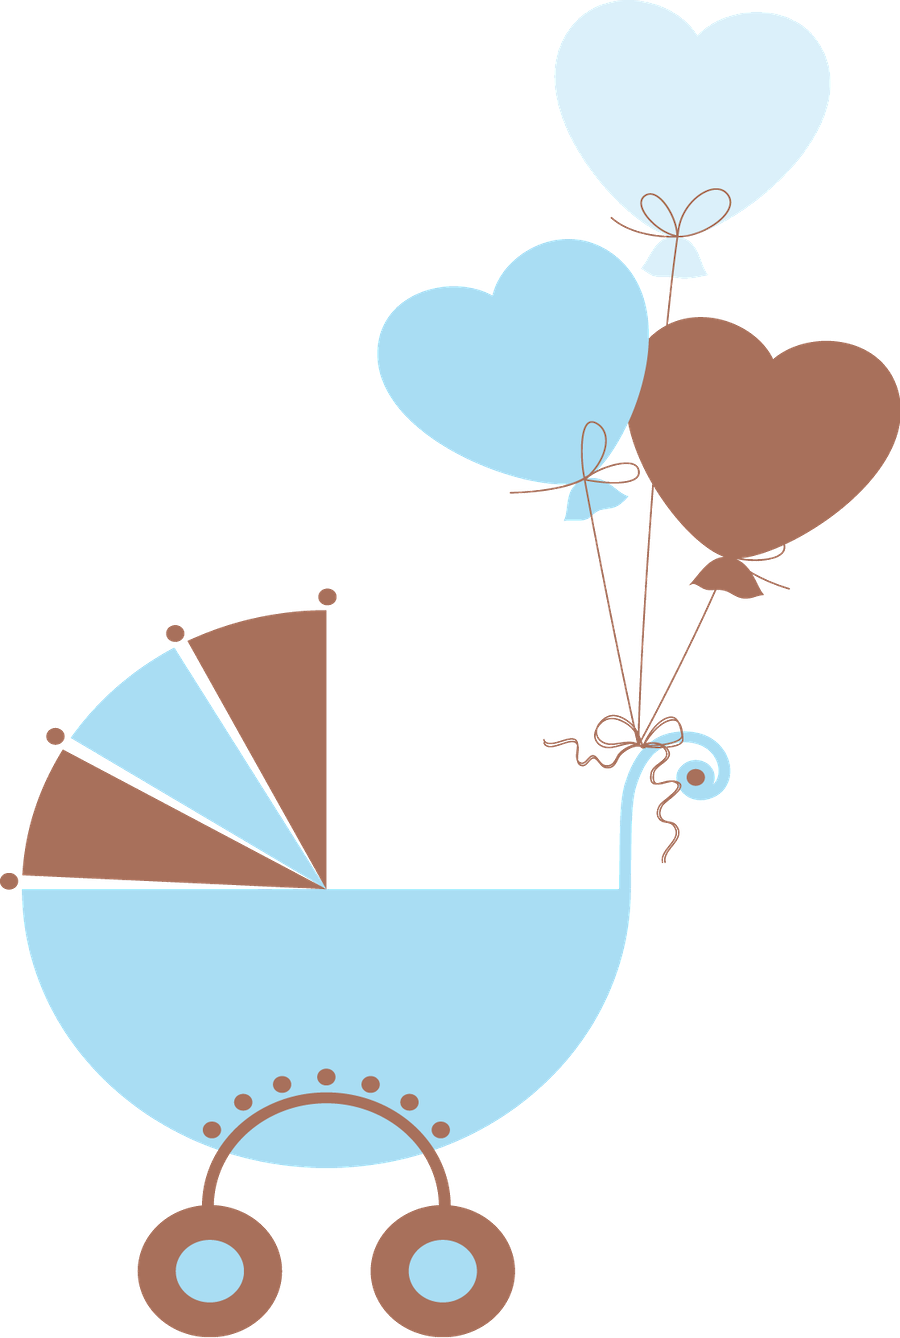 Baby Strollerand Heart Balloons PNG